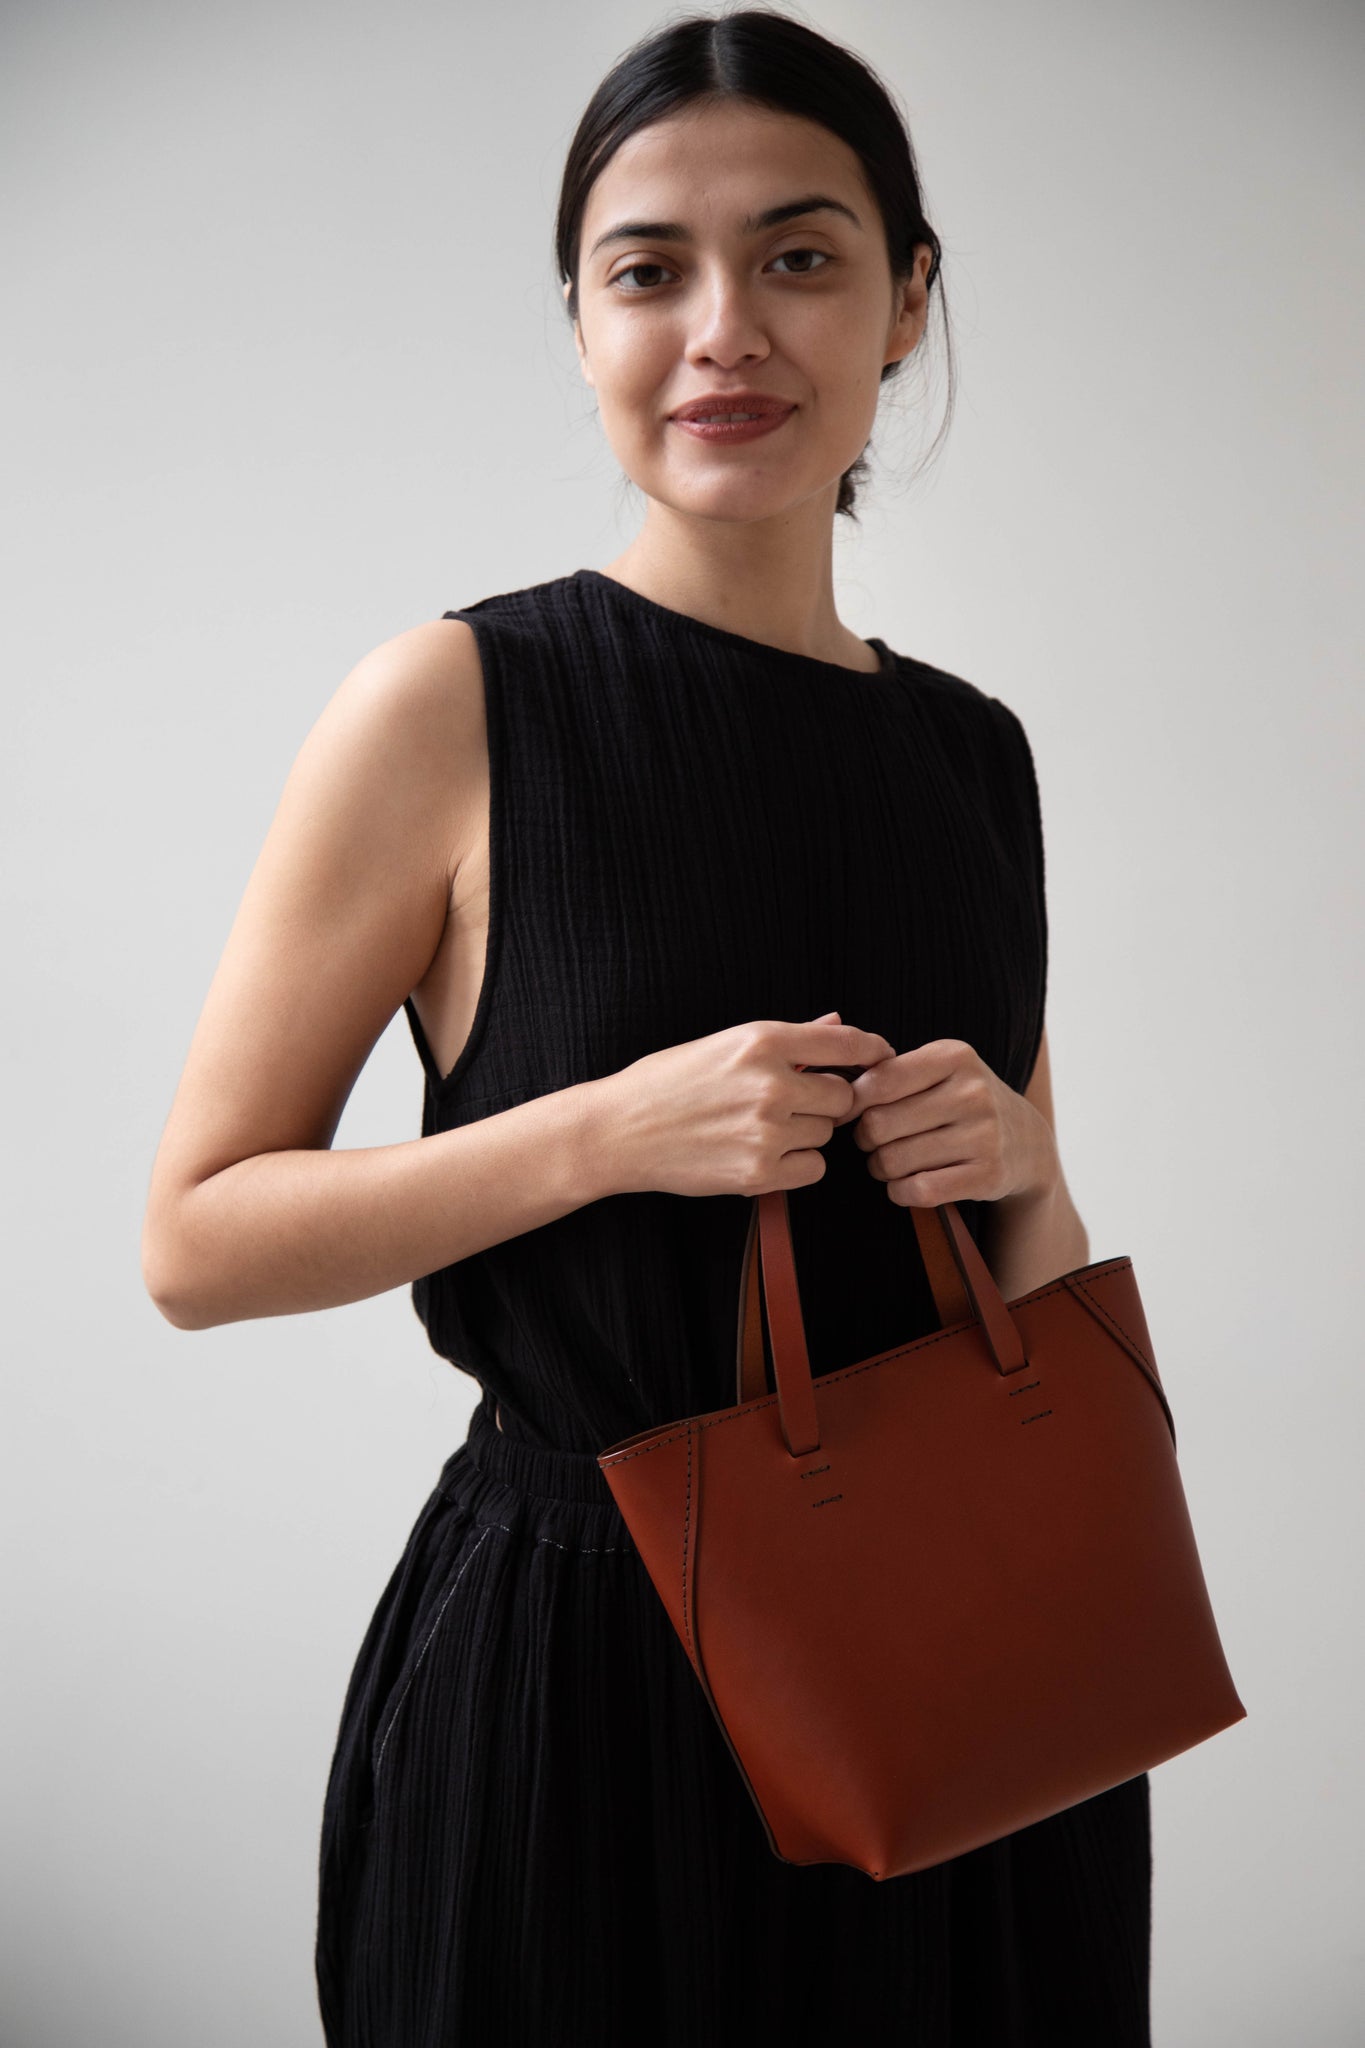 Melete Asis Small Tote in Chestnut